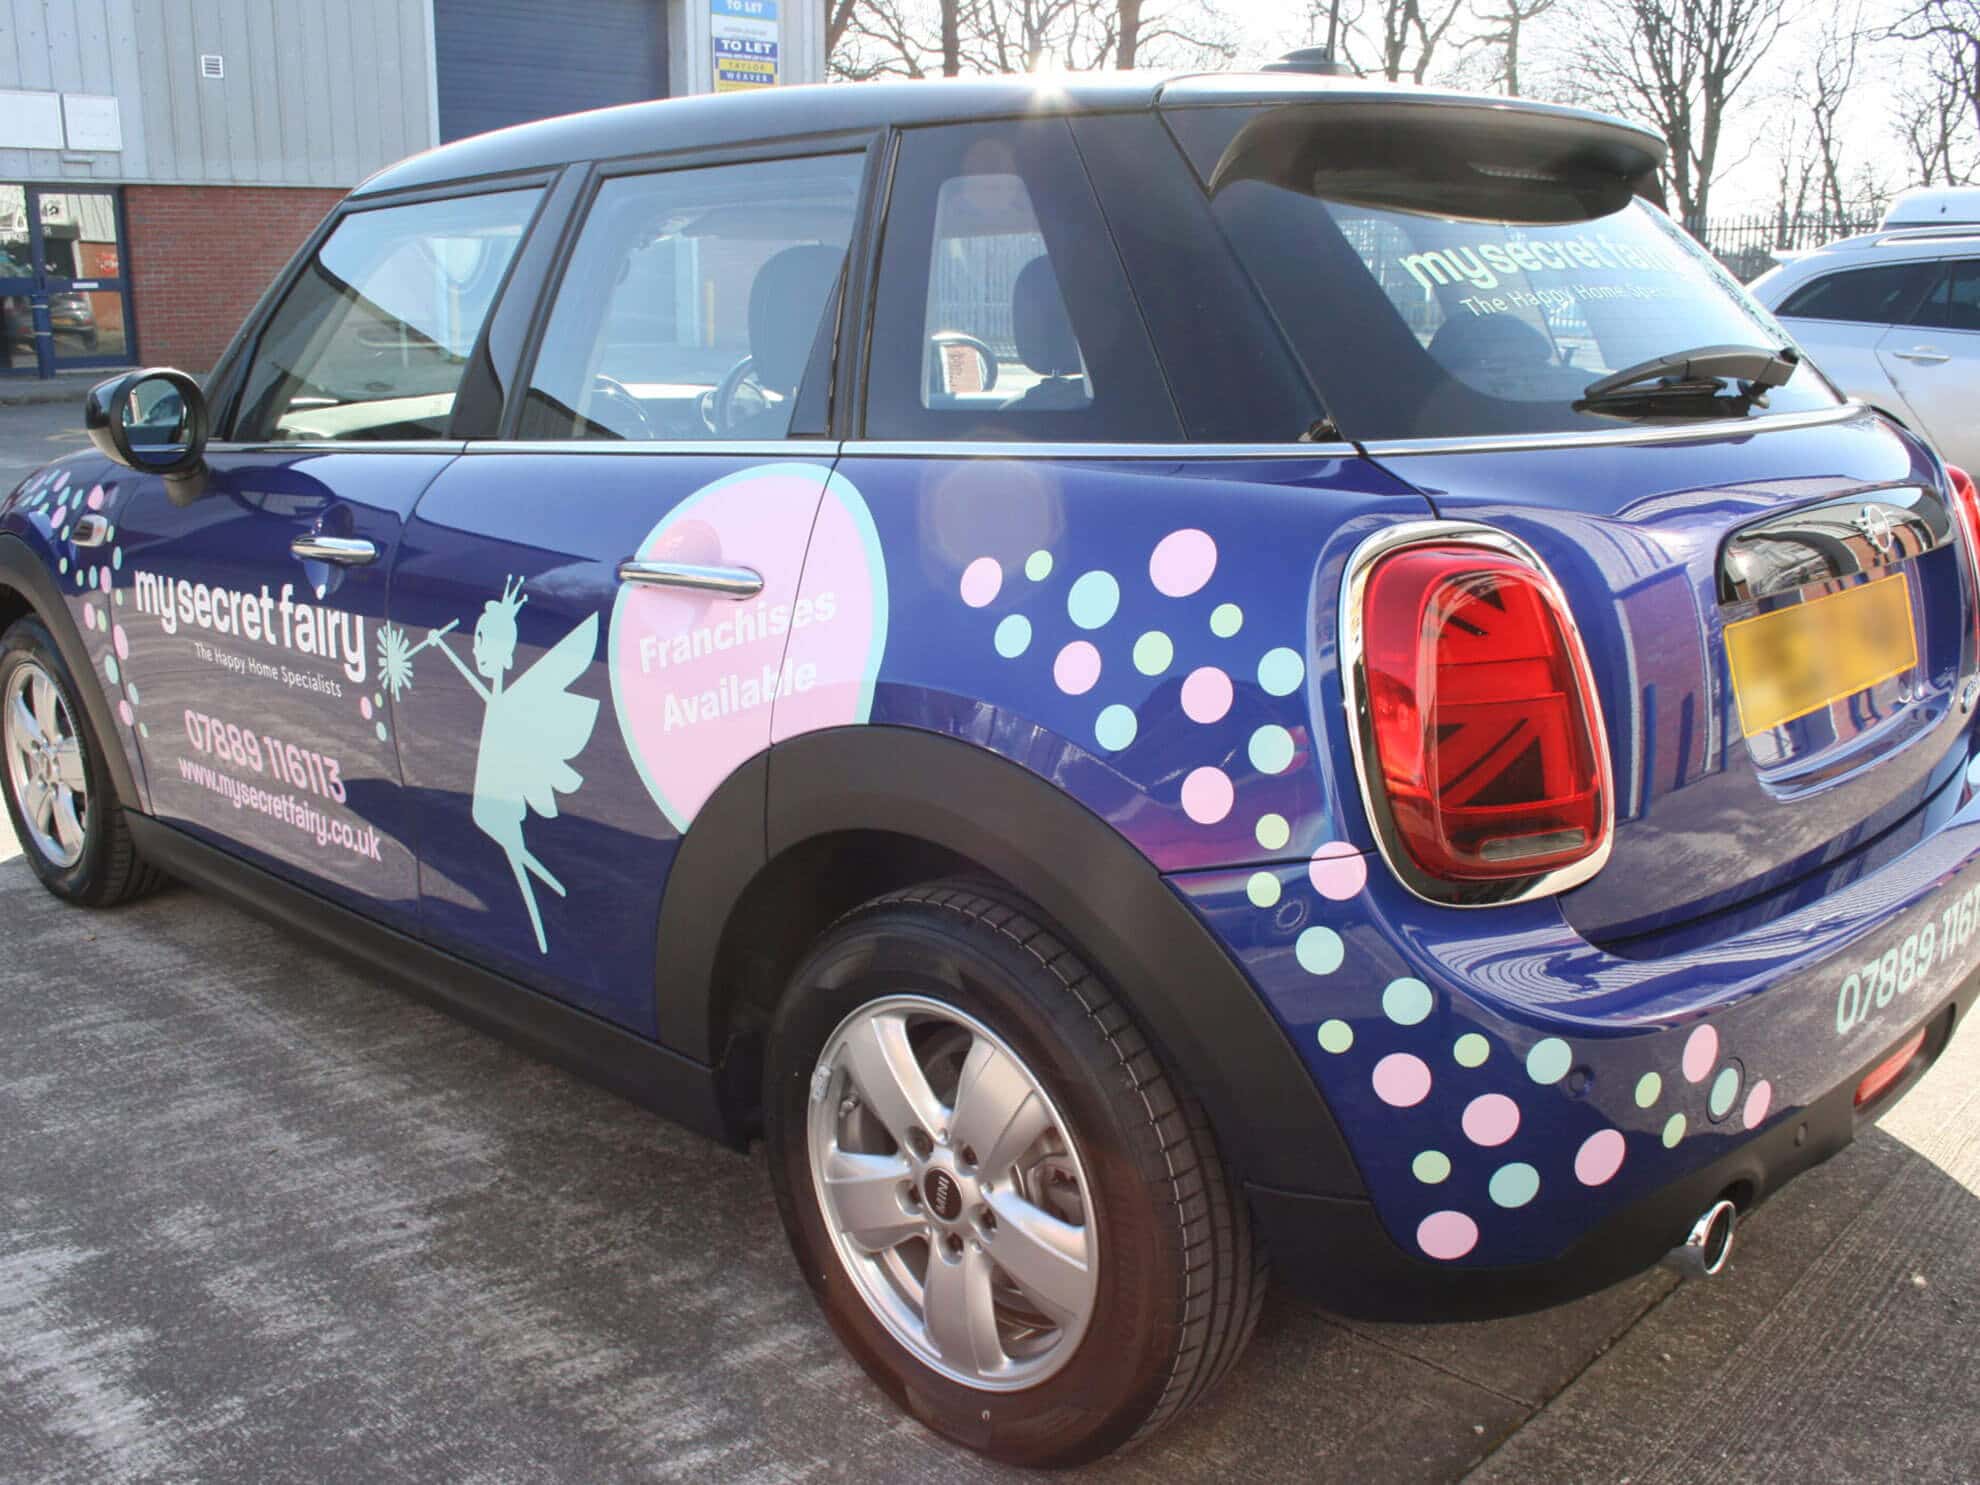 My Secret Fairy mini digitally print cut vehicle graphics and wrapping